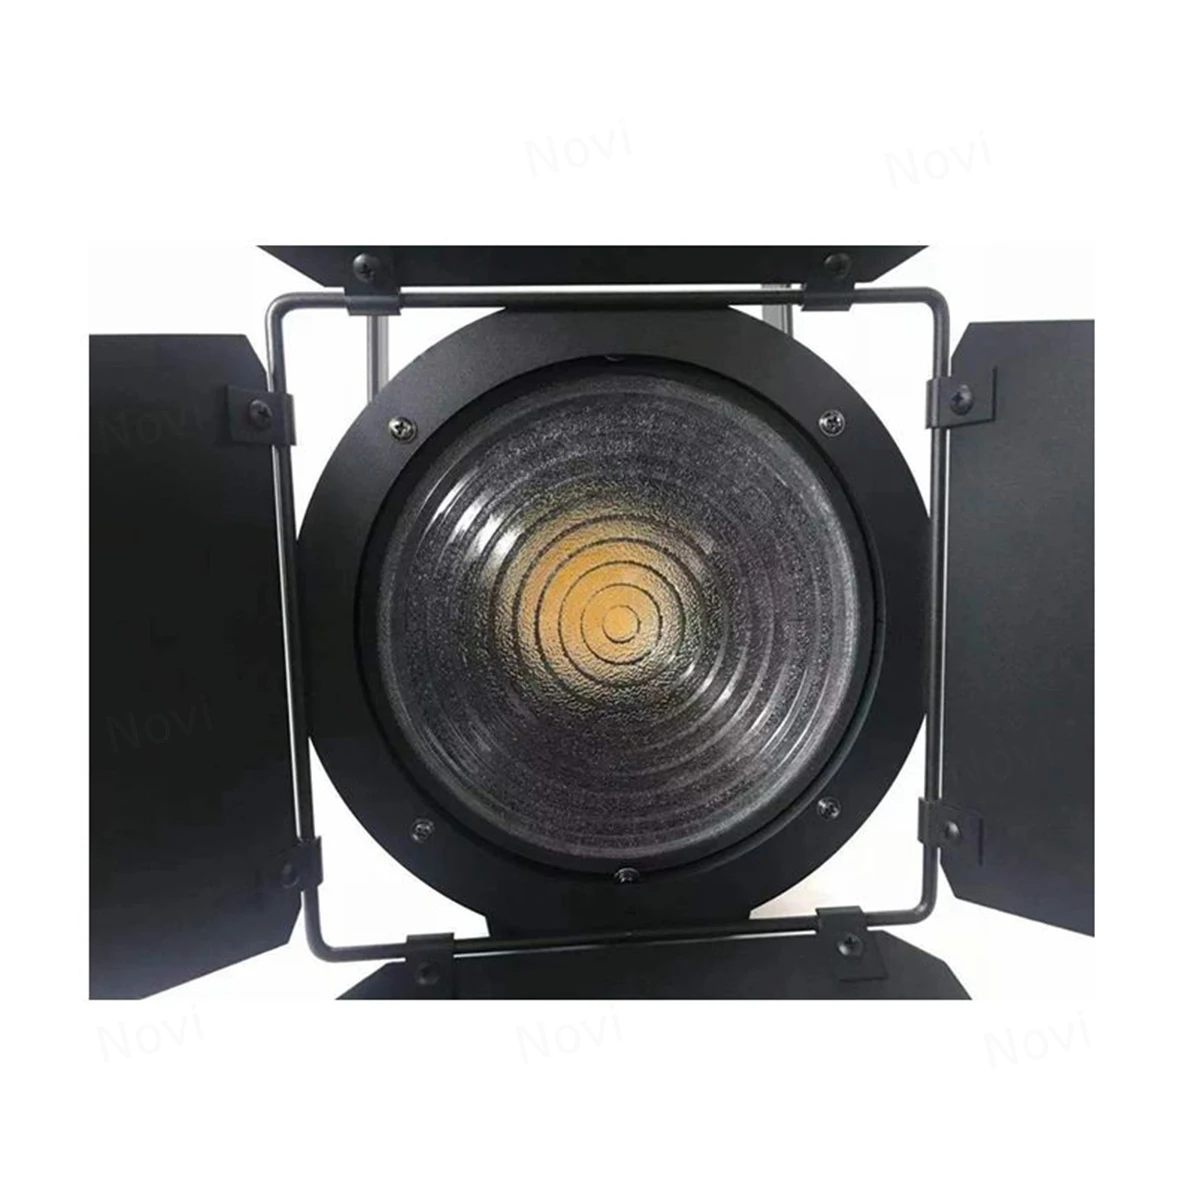 200W 100W Manual Focus Zoom Fresnel Lens Studio Light Profile Spotlight For Tv Show Stage Events Theater Camera